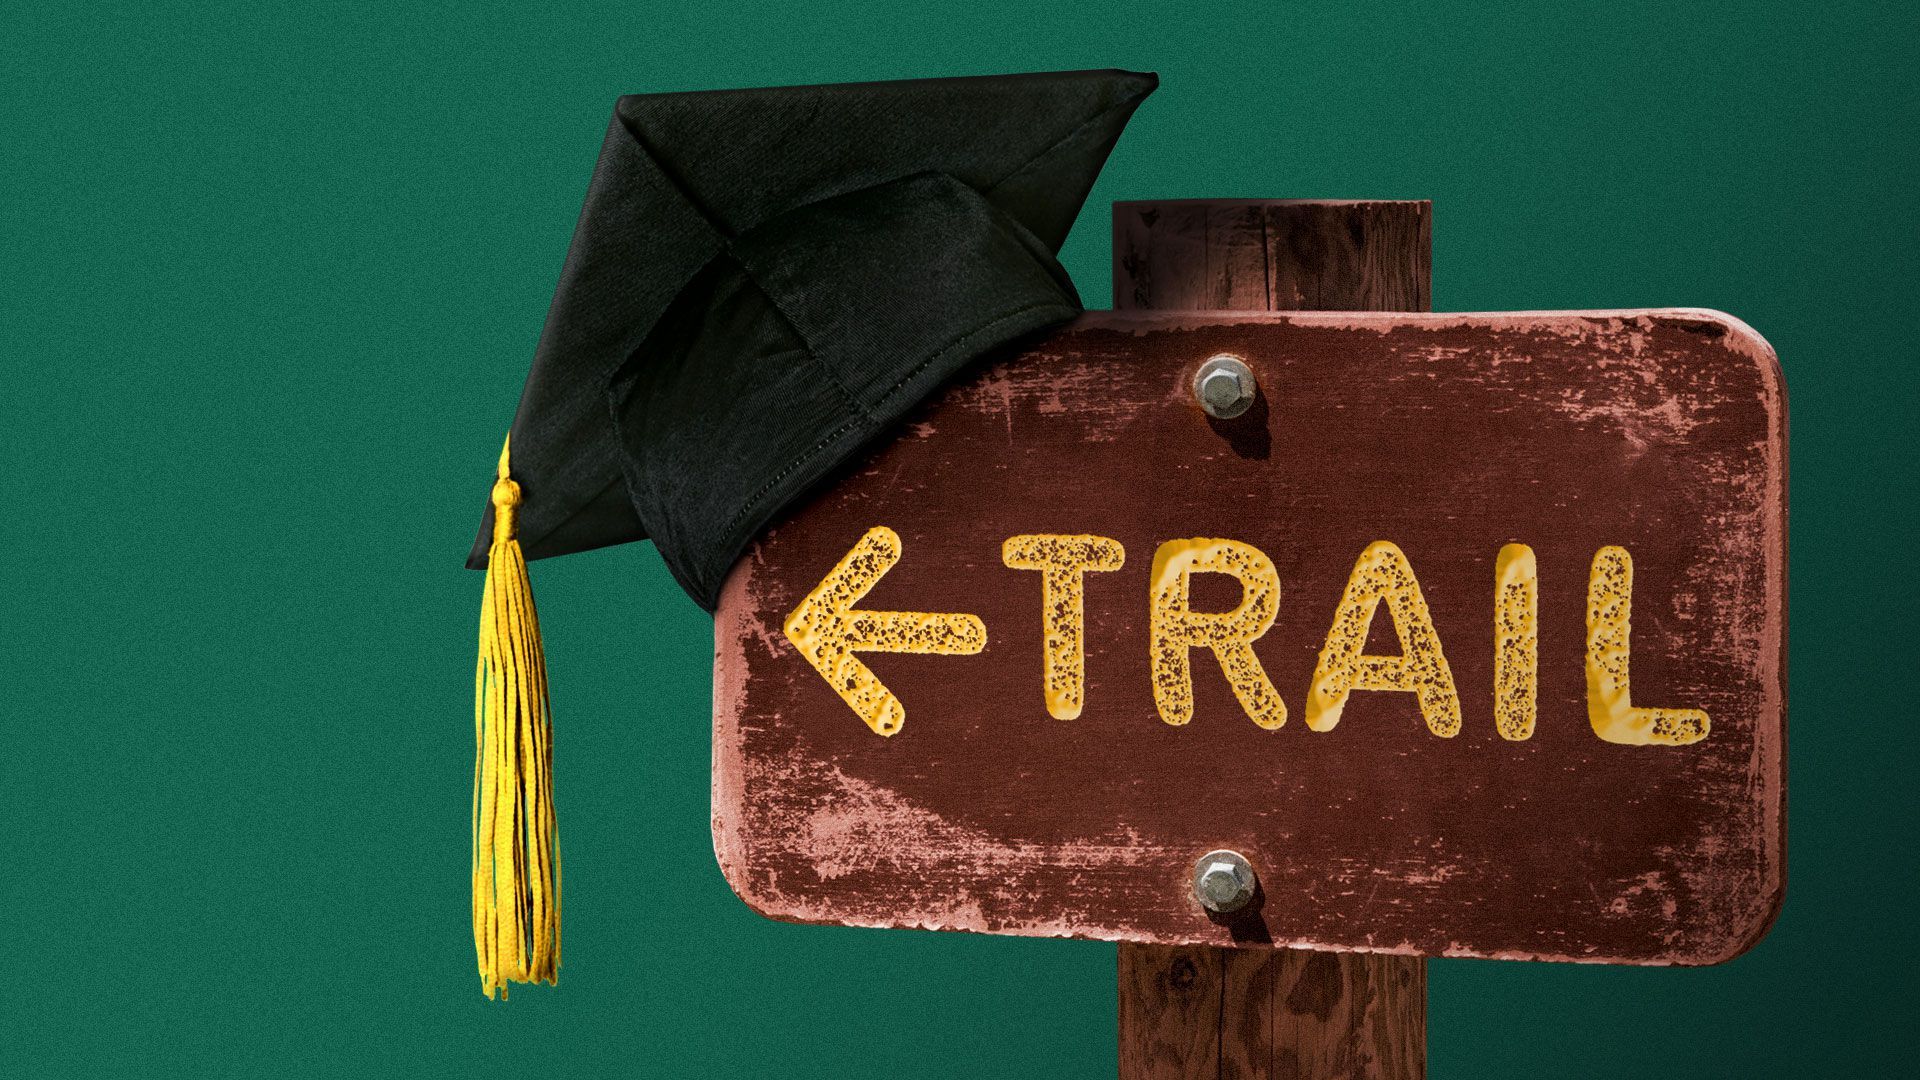 Illustration of a mortarboard hanging on the corner of a trail sign.